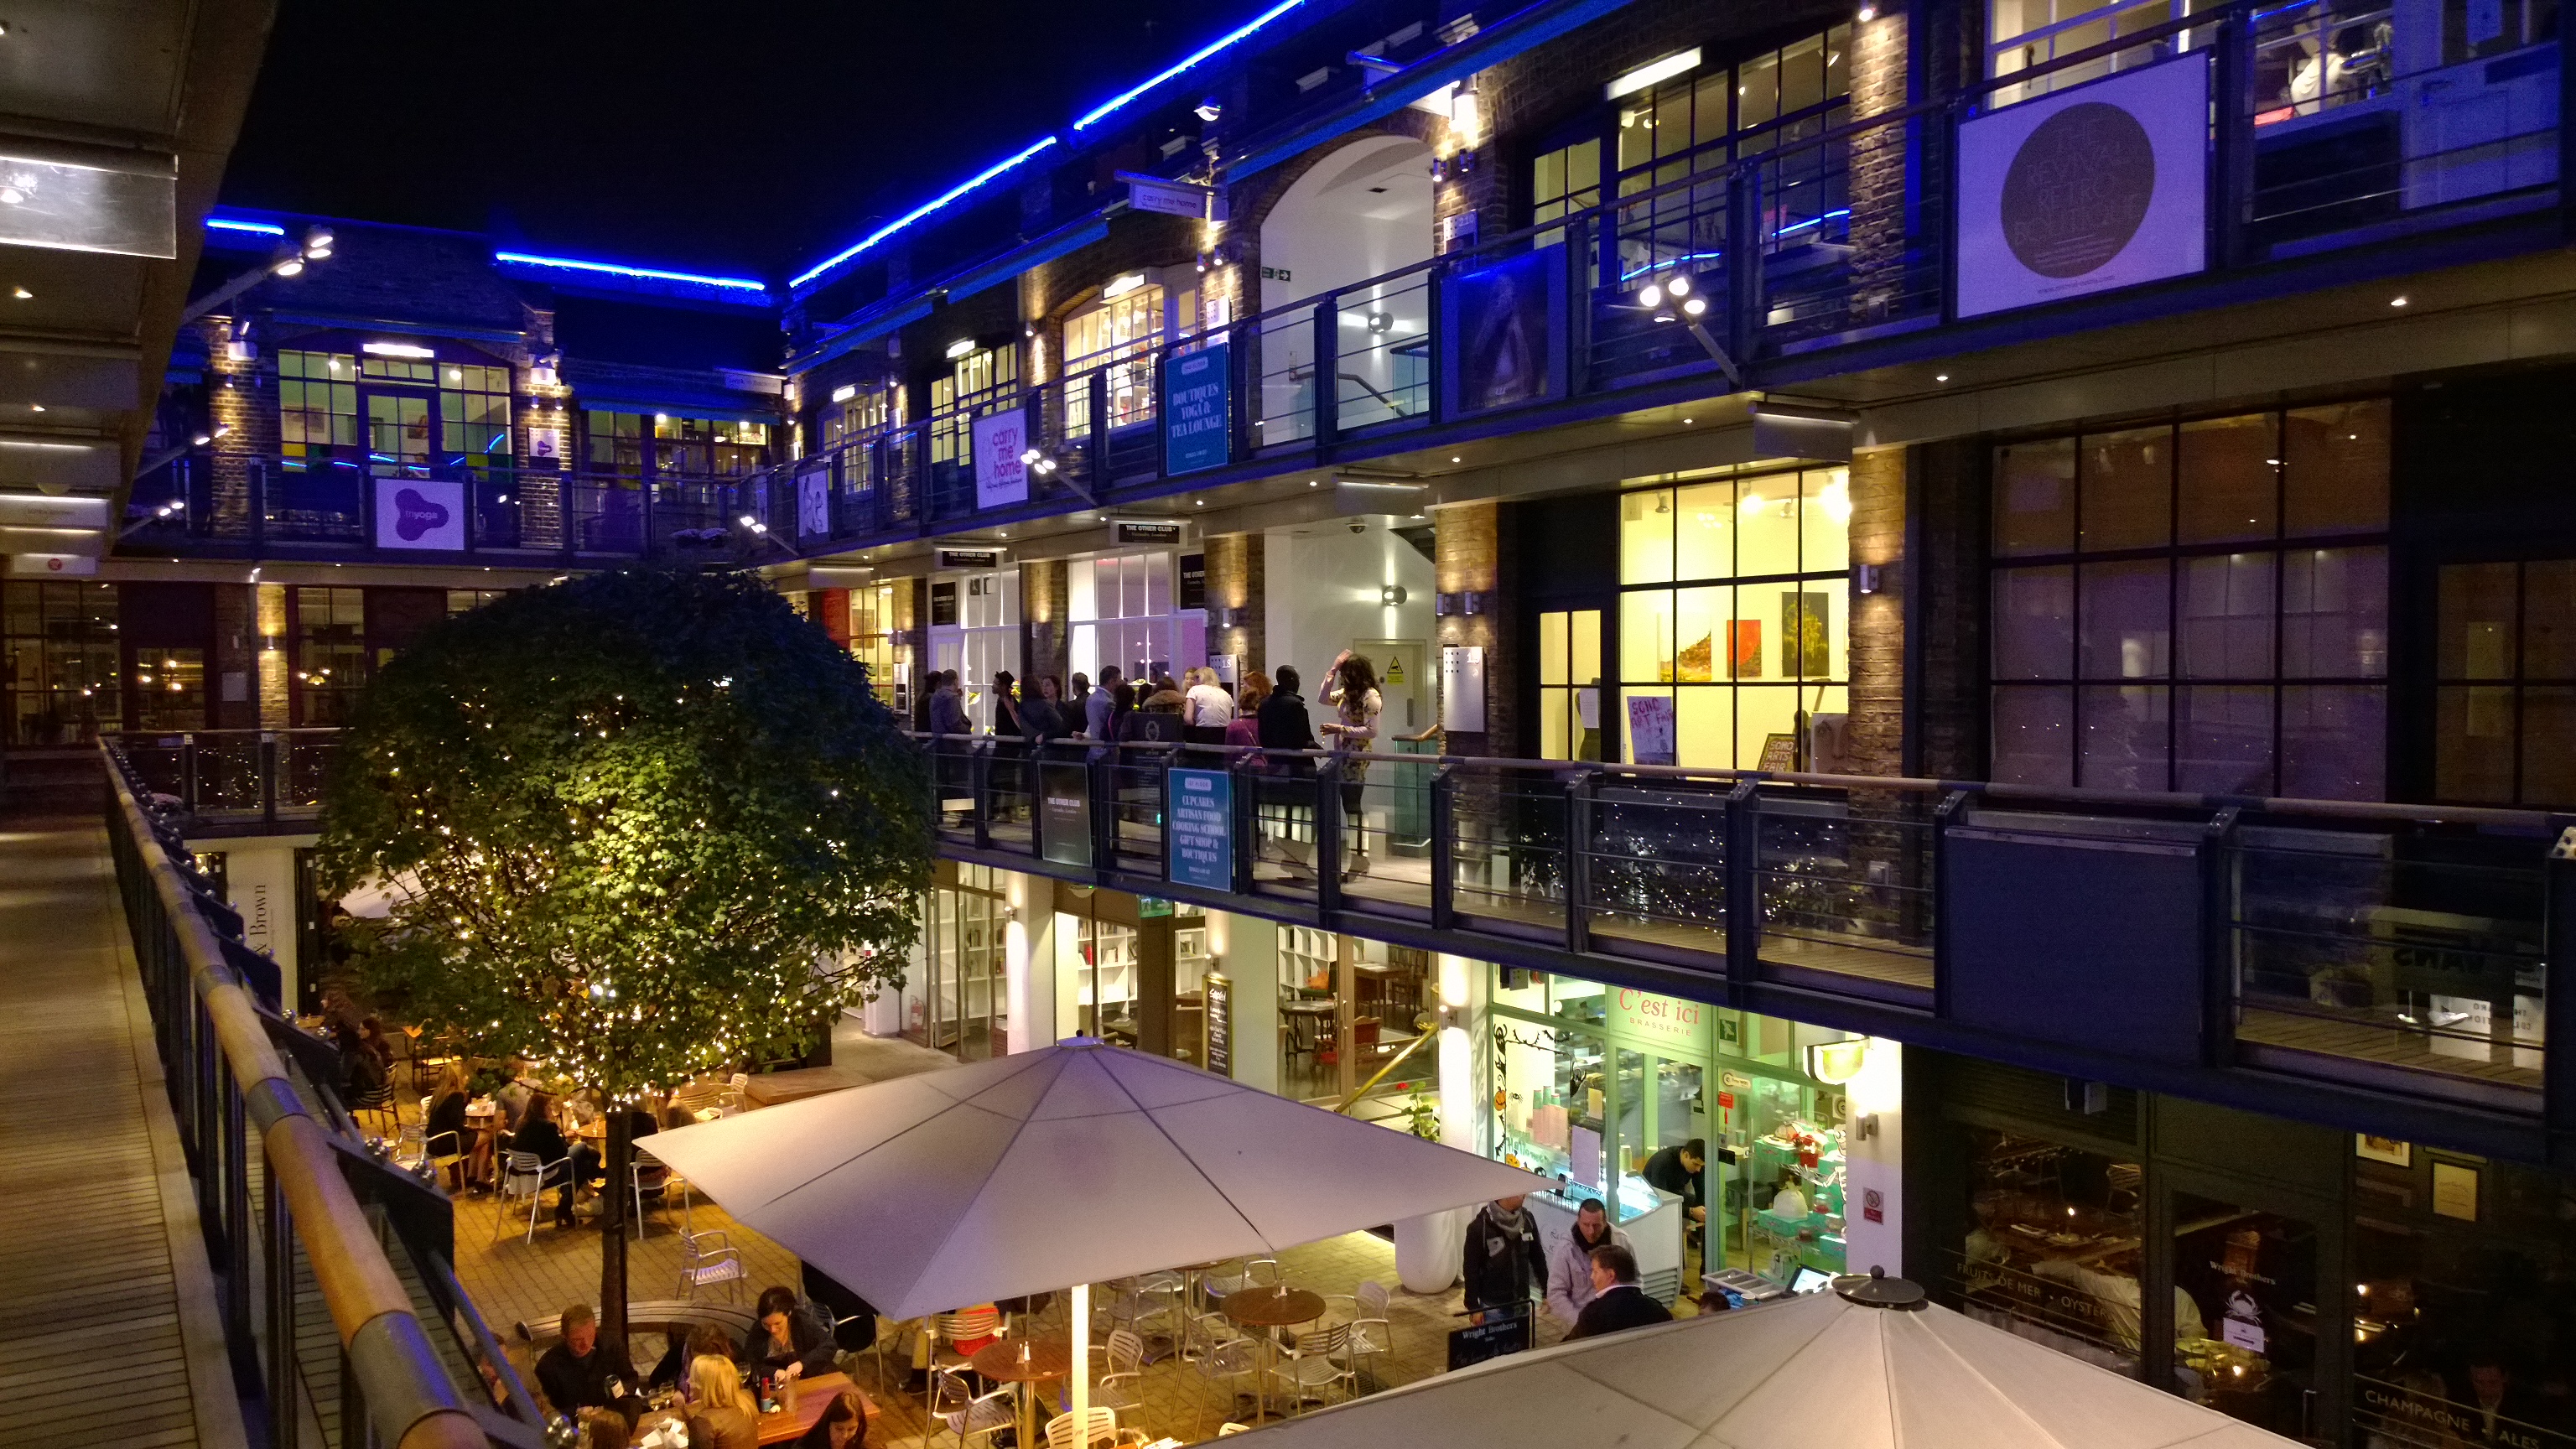 Kingly Court 2013